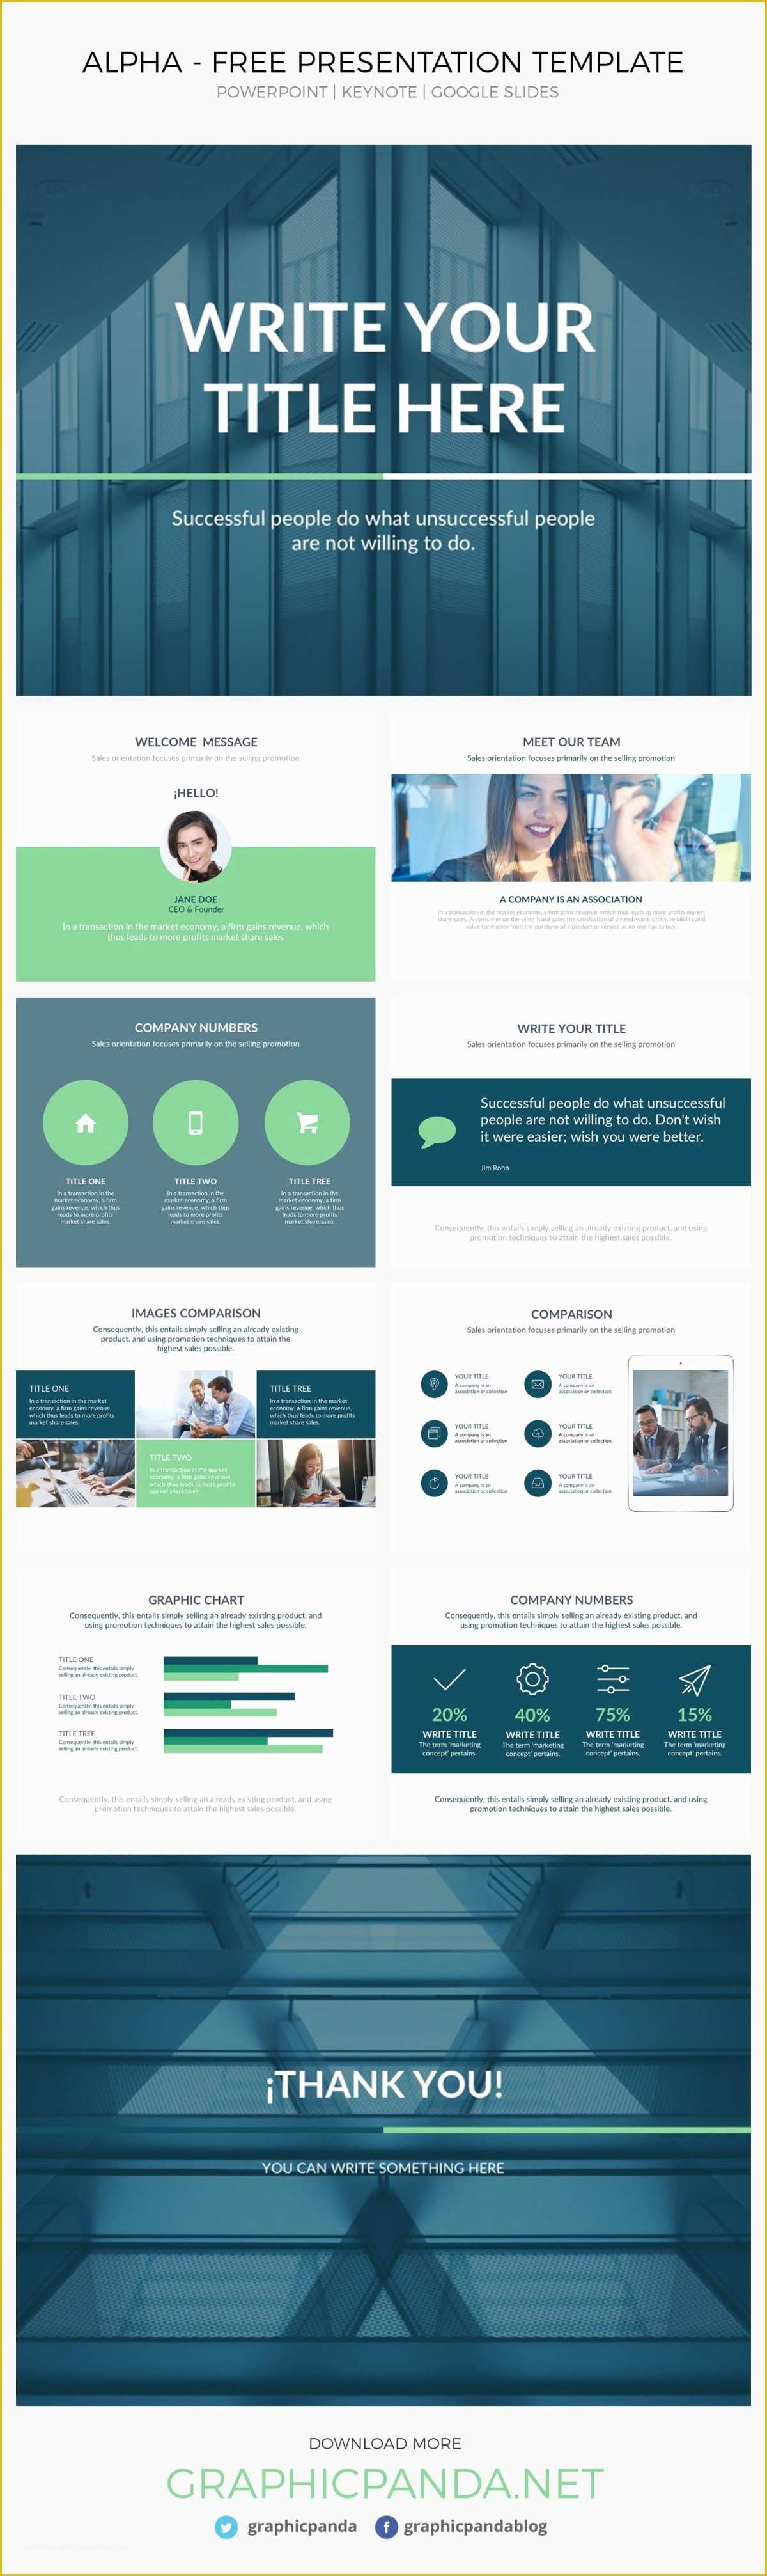 Templates for Pages Free Download Of Alpha Presentation Template Powerpoint Keynote Google